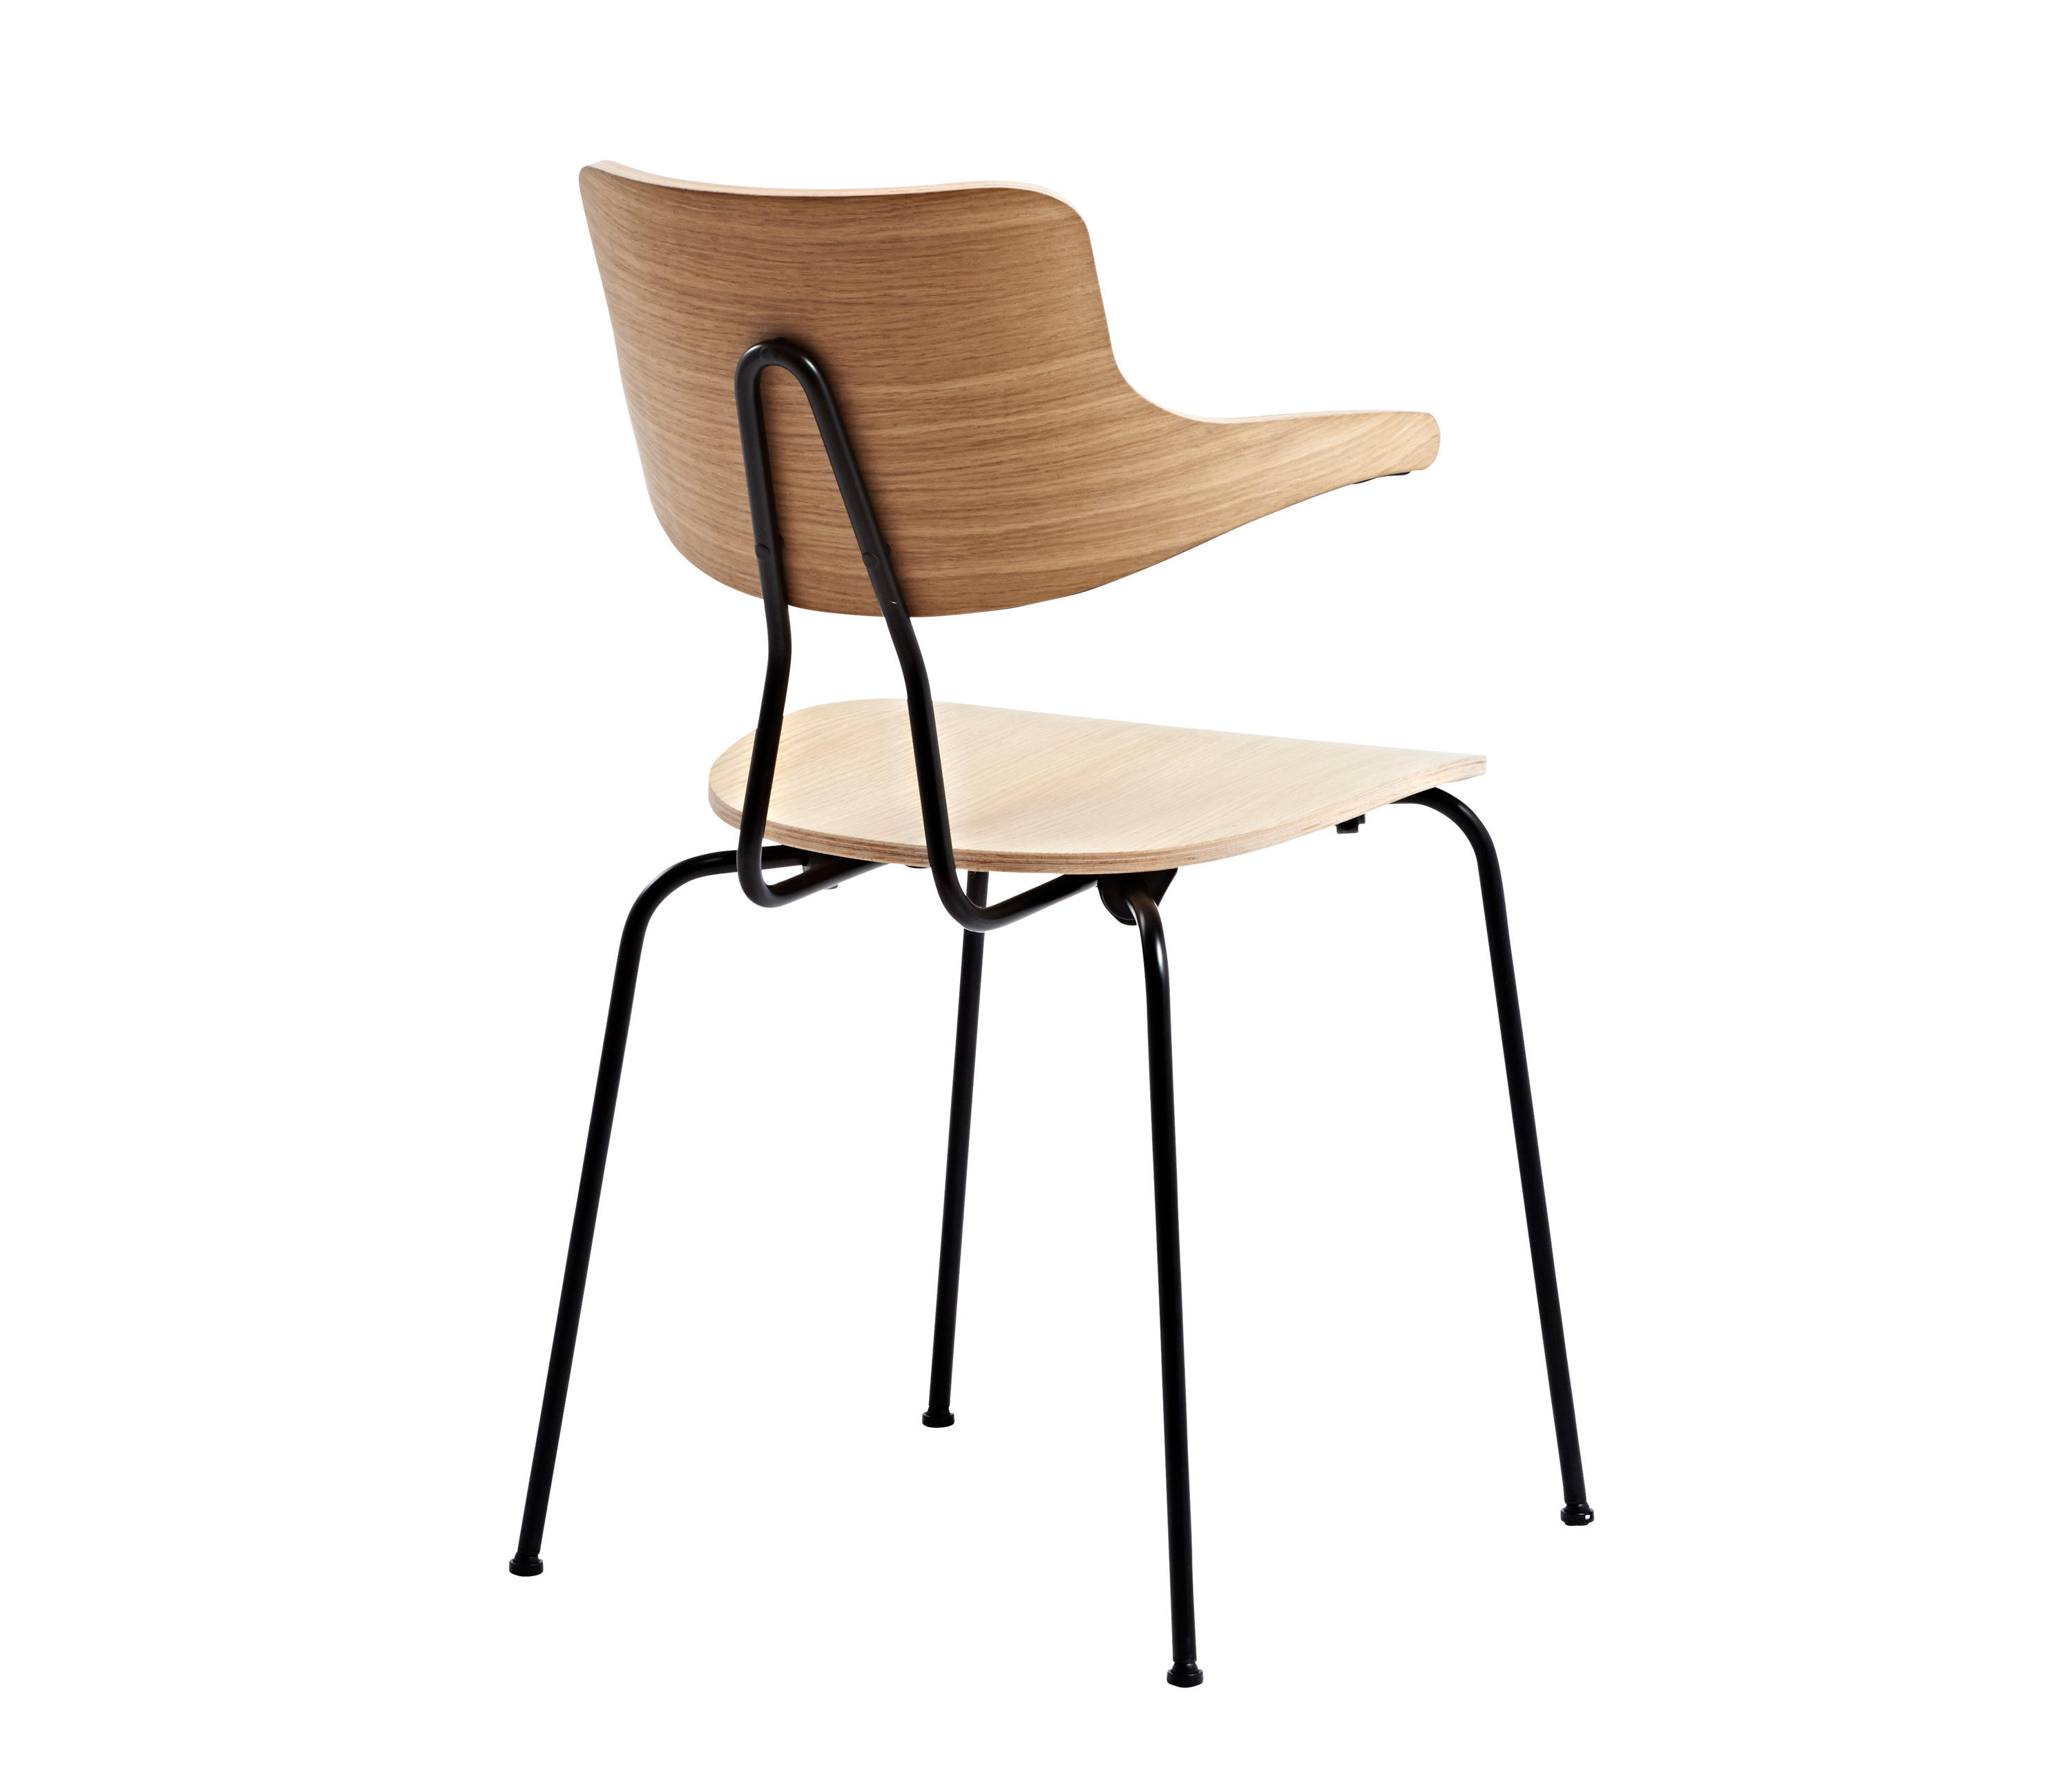 VL118 - Chairs from Vermund | Architonic